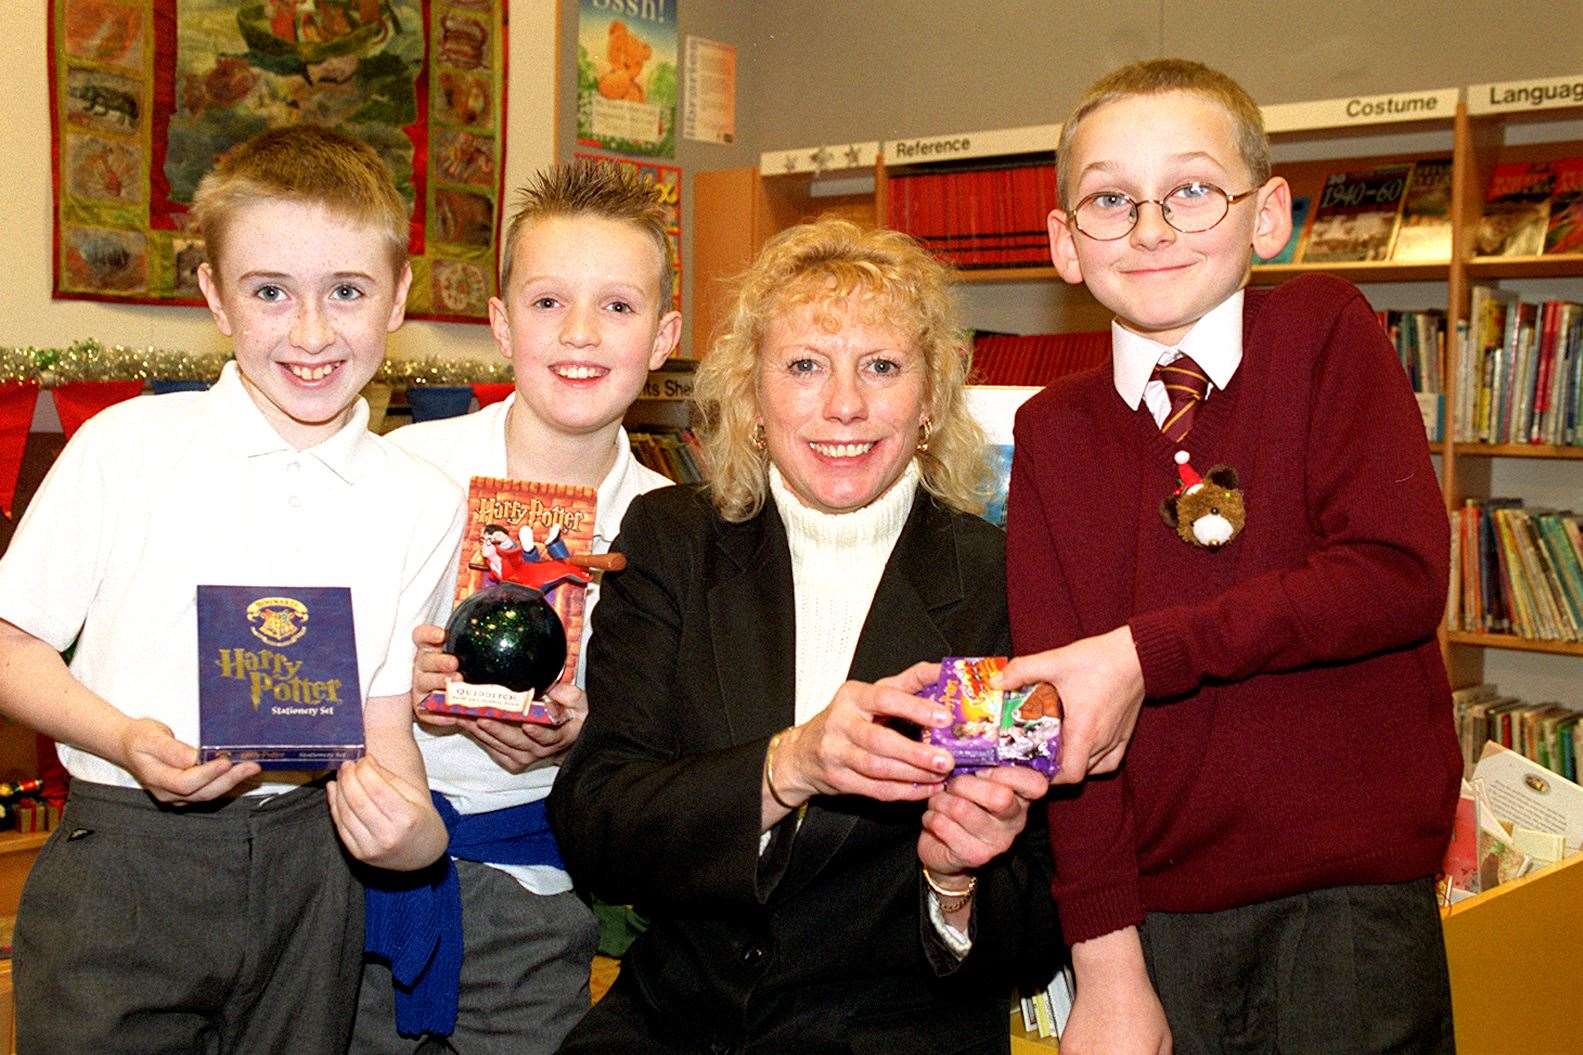 Harry Potter competition winners at Sheerness library - cinema manager presenting prizes to James Squillaci, Rose Fosbraey and Kerr Jeferies